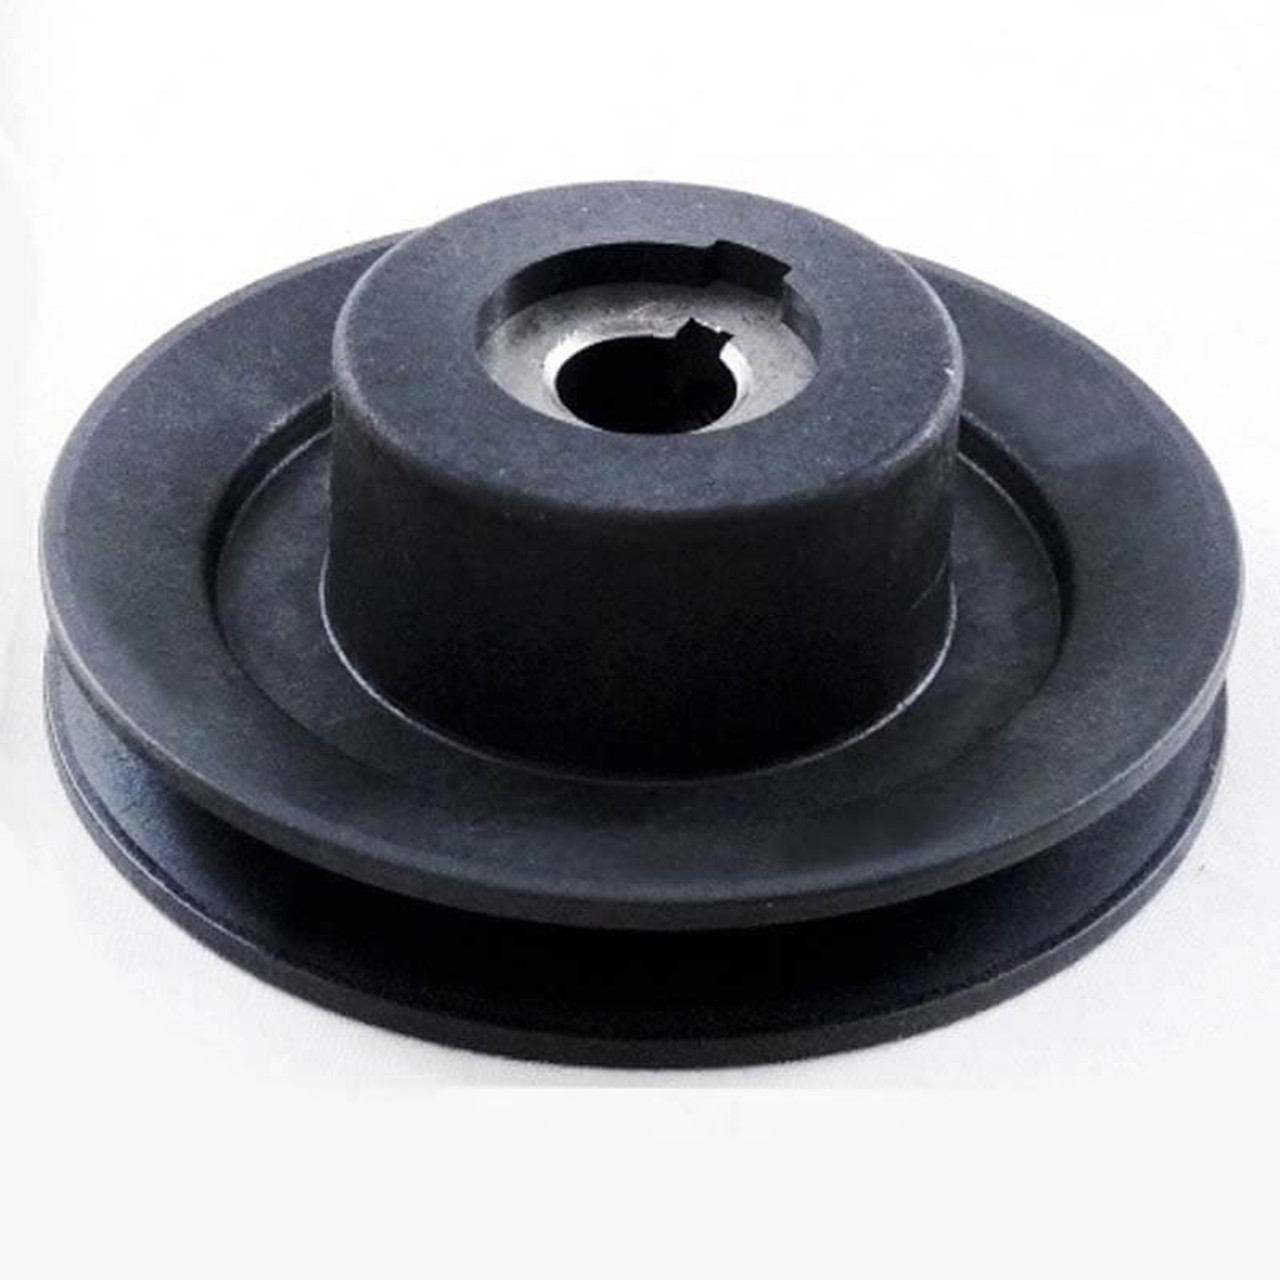 KR11AZ406 - Blower Pulley | Furnace Parts/Blower Parts/Pulleys ...